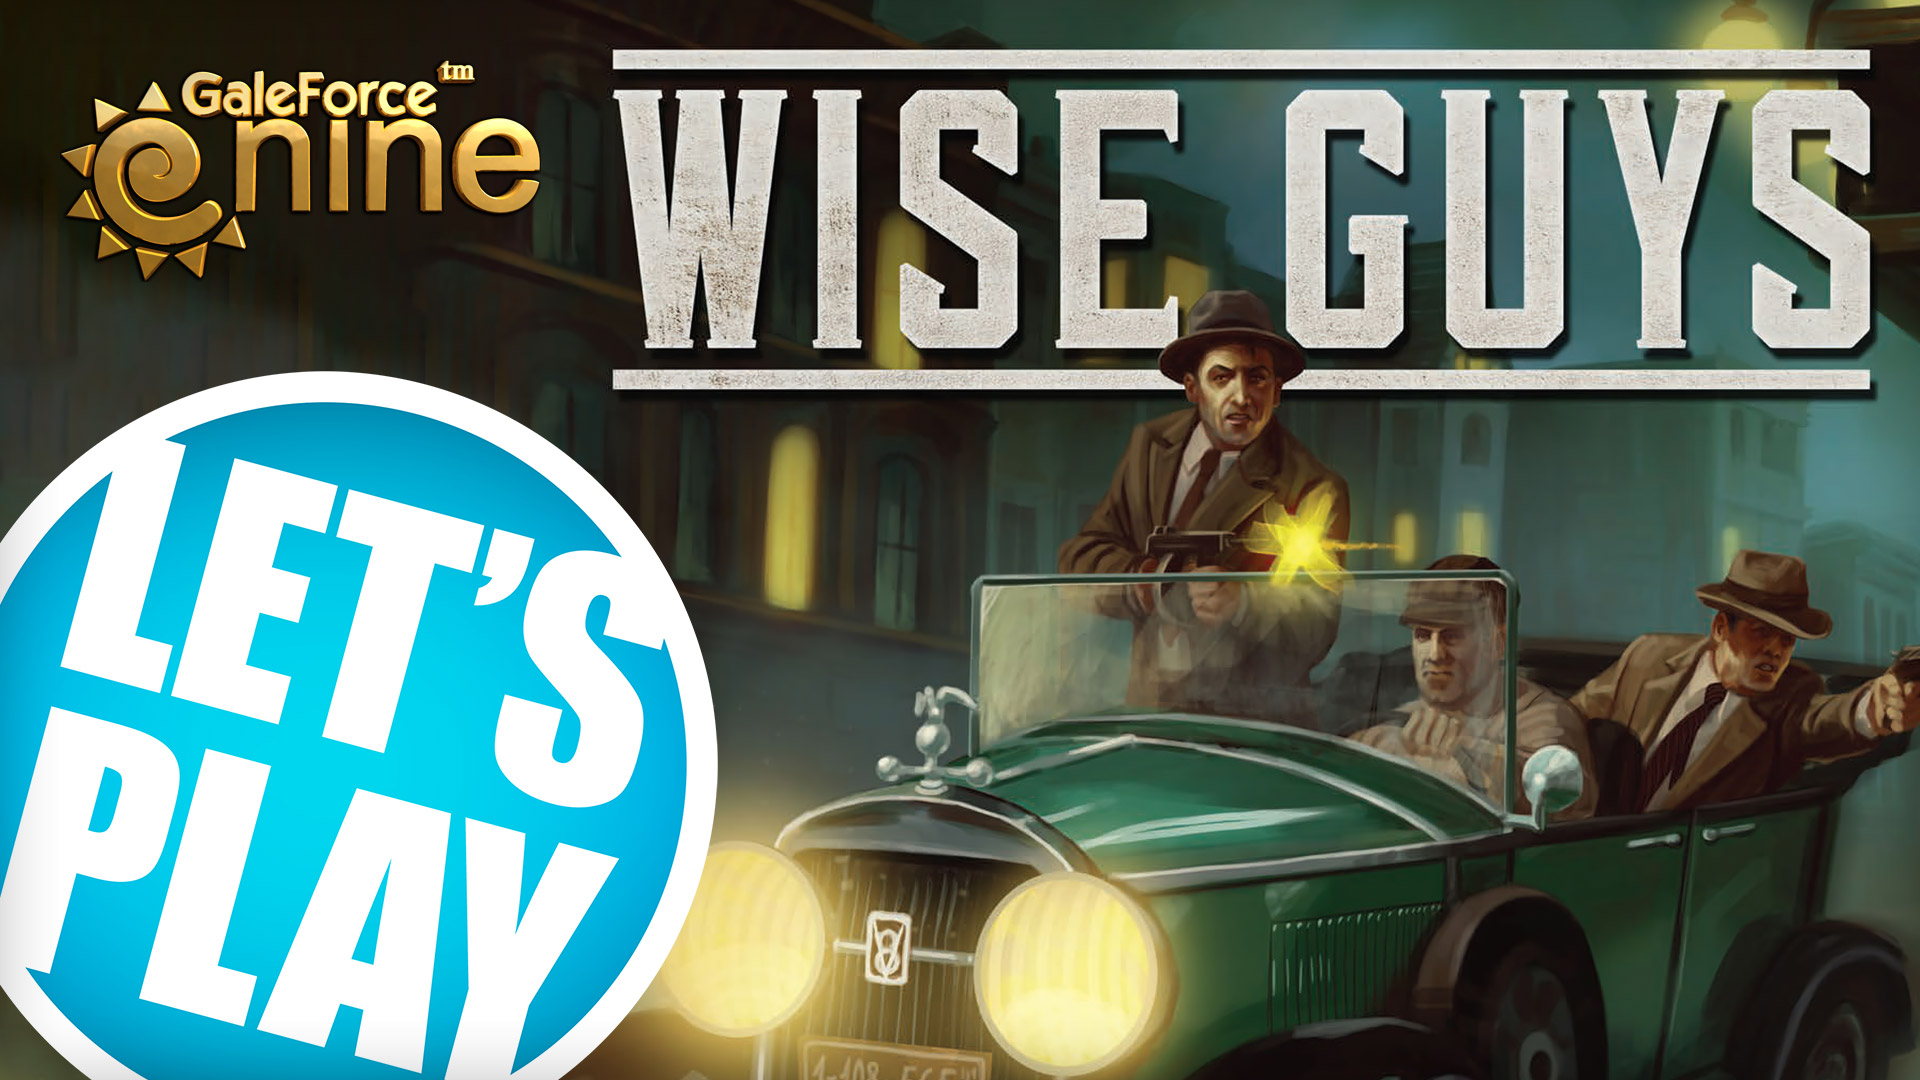 Lets-Play---Wise-Guys-coverimage